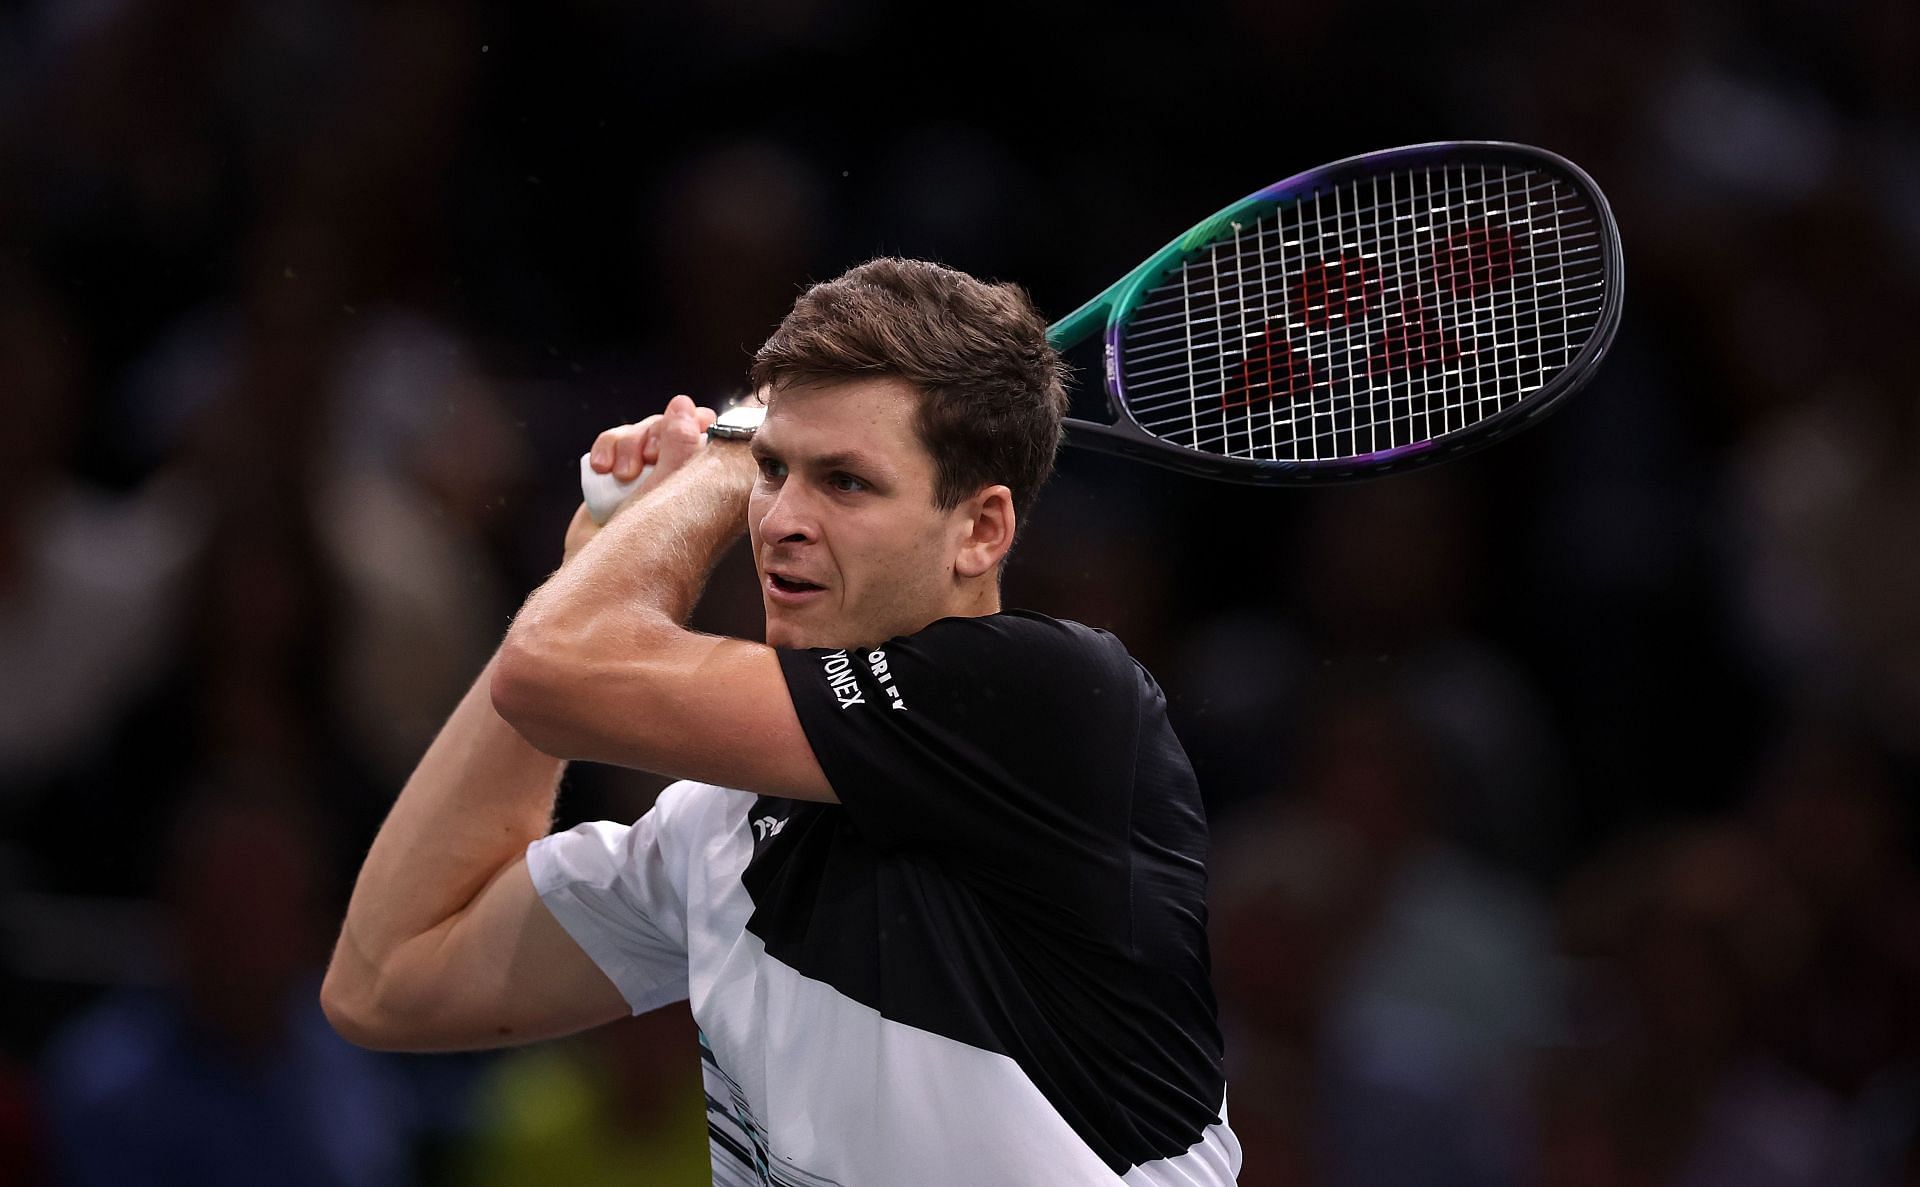 Hubert Hurkacz in action at the 2022 Rolex Paris Masters